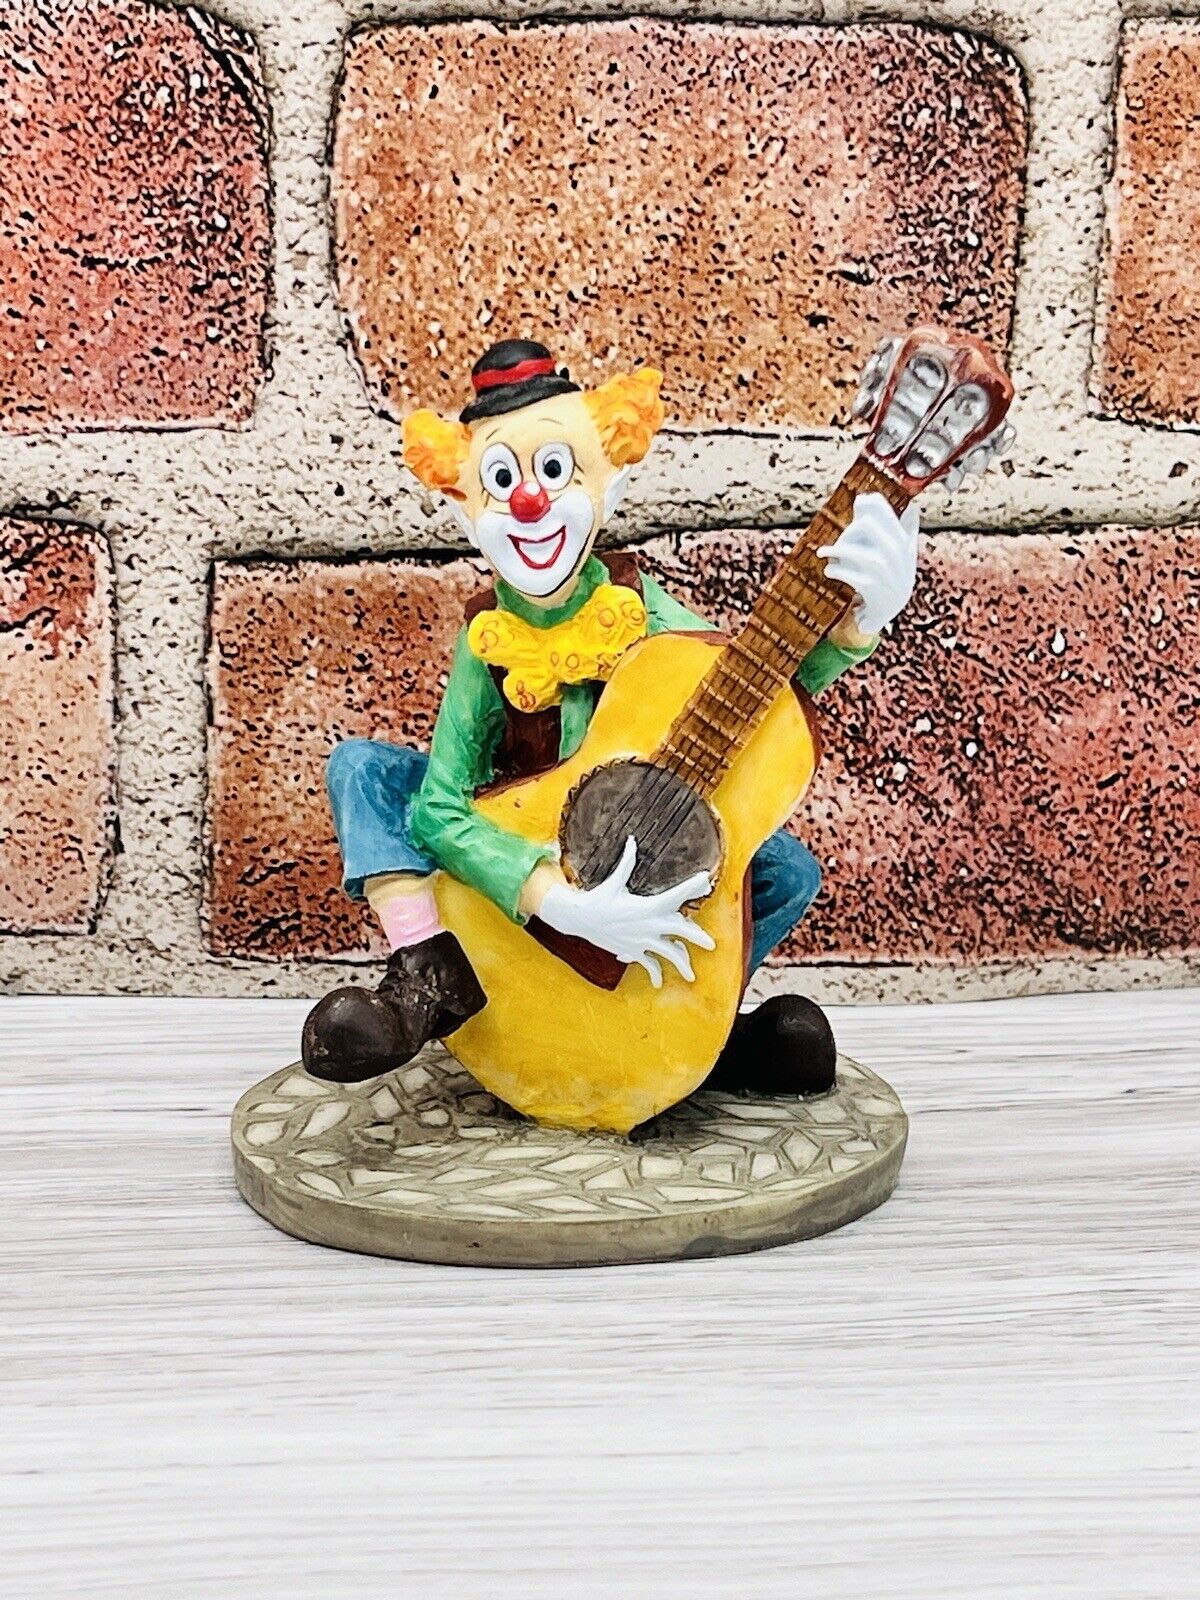 Clown Stone Avenue Figurine Collectors Paradise Circus Hobo Playing Guitar